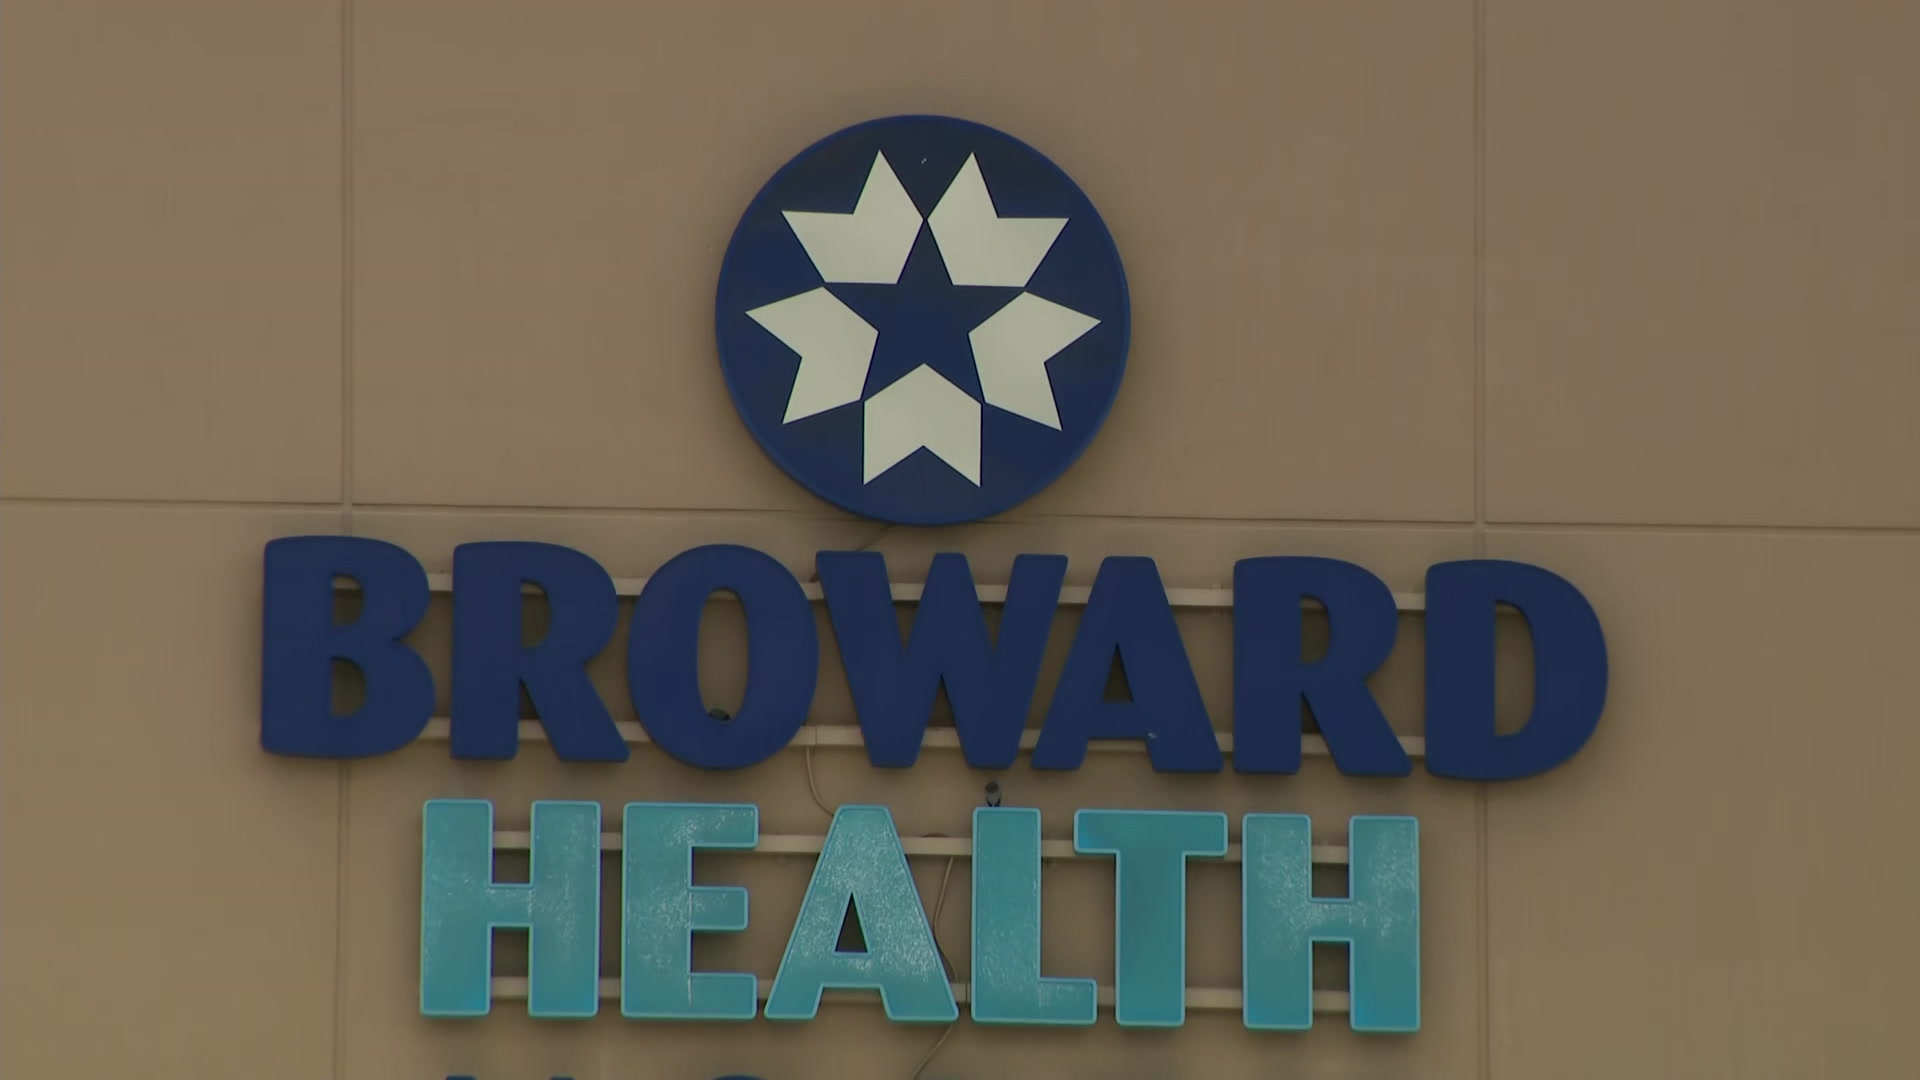 Broward Health Suffered Data Breach, More Than 1.3 Million People Affected